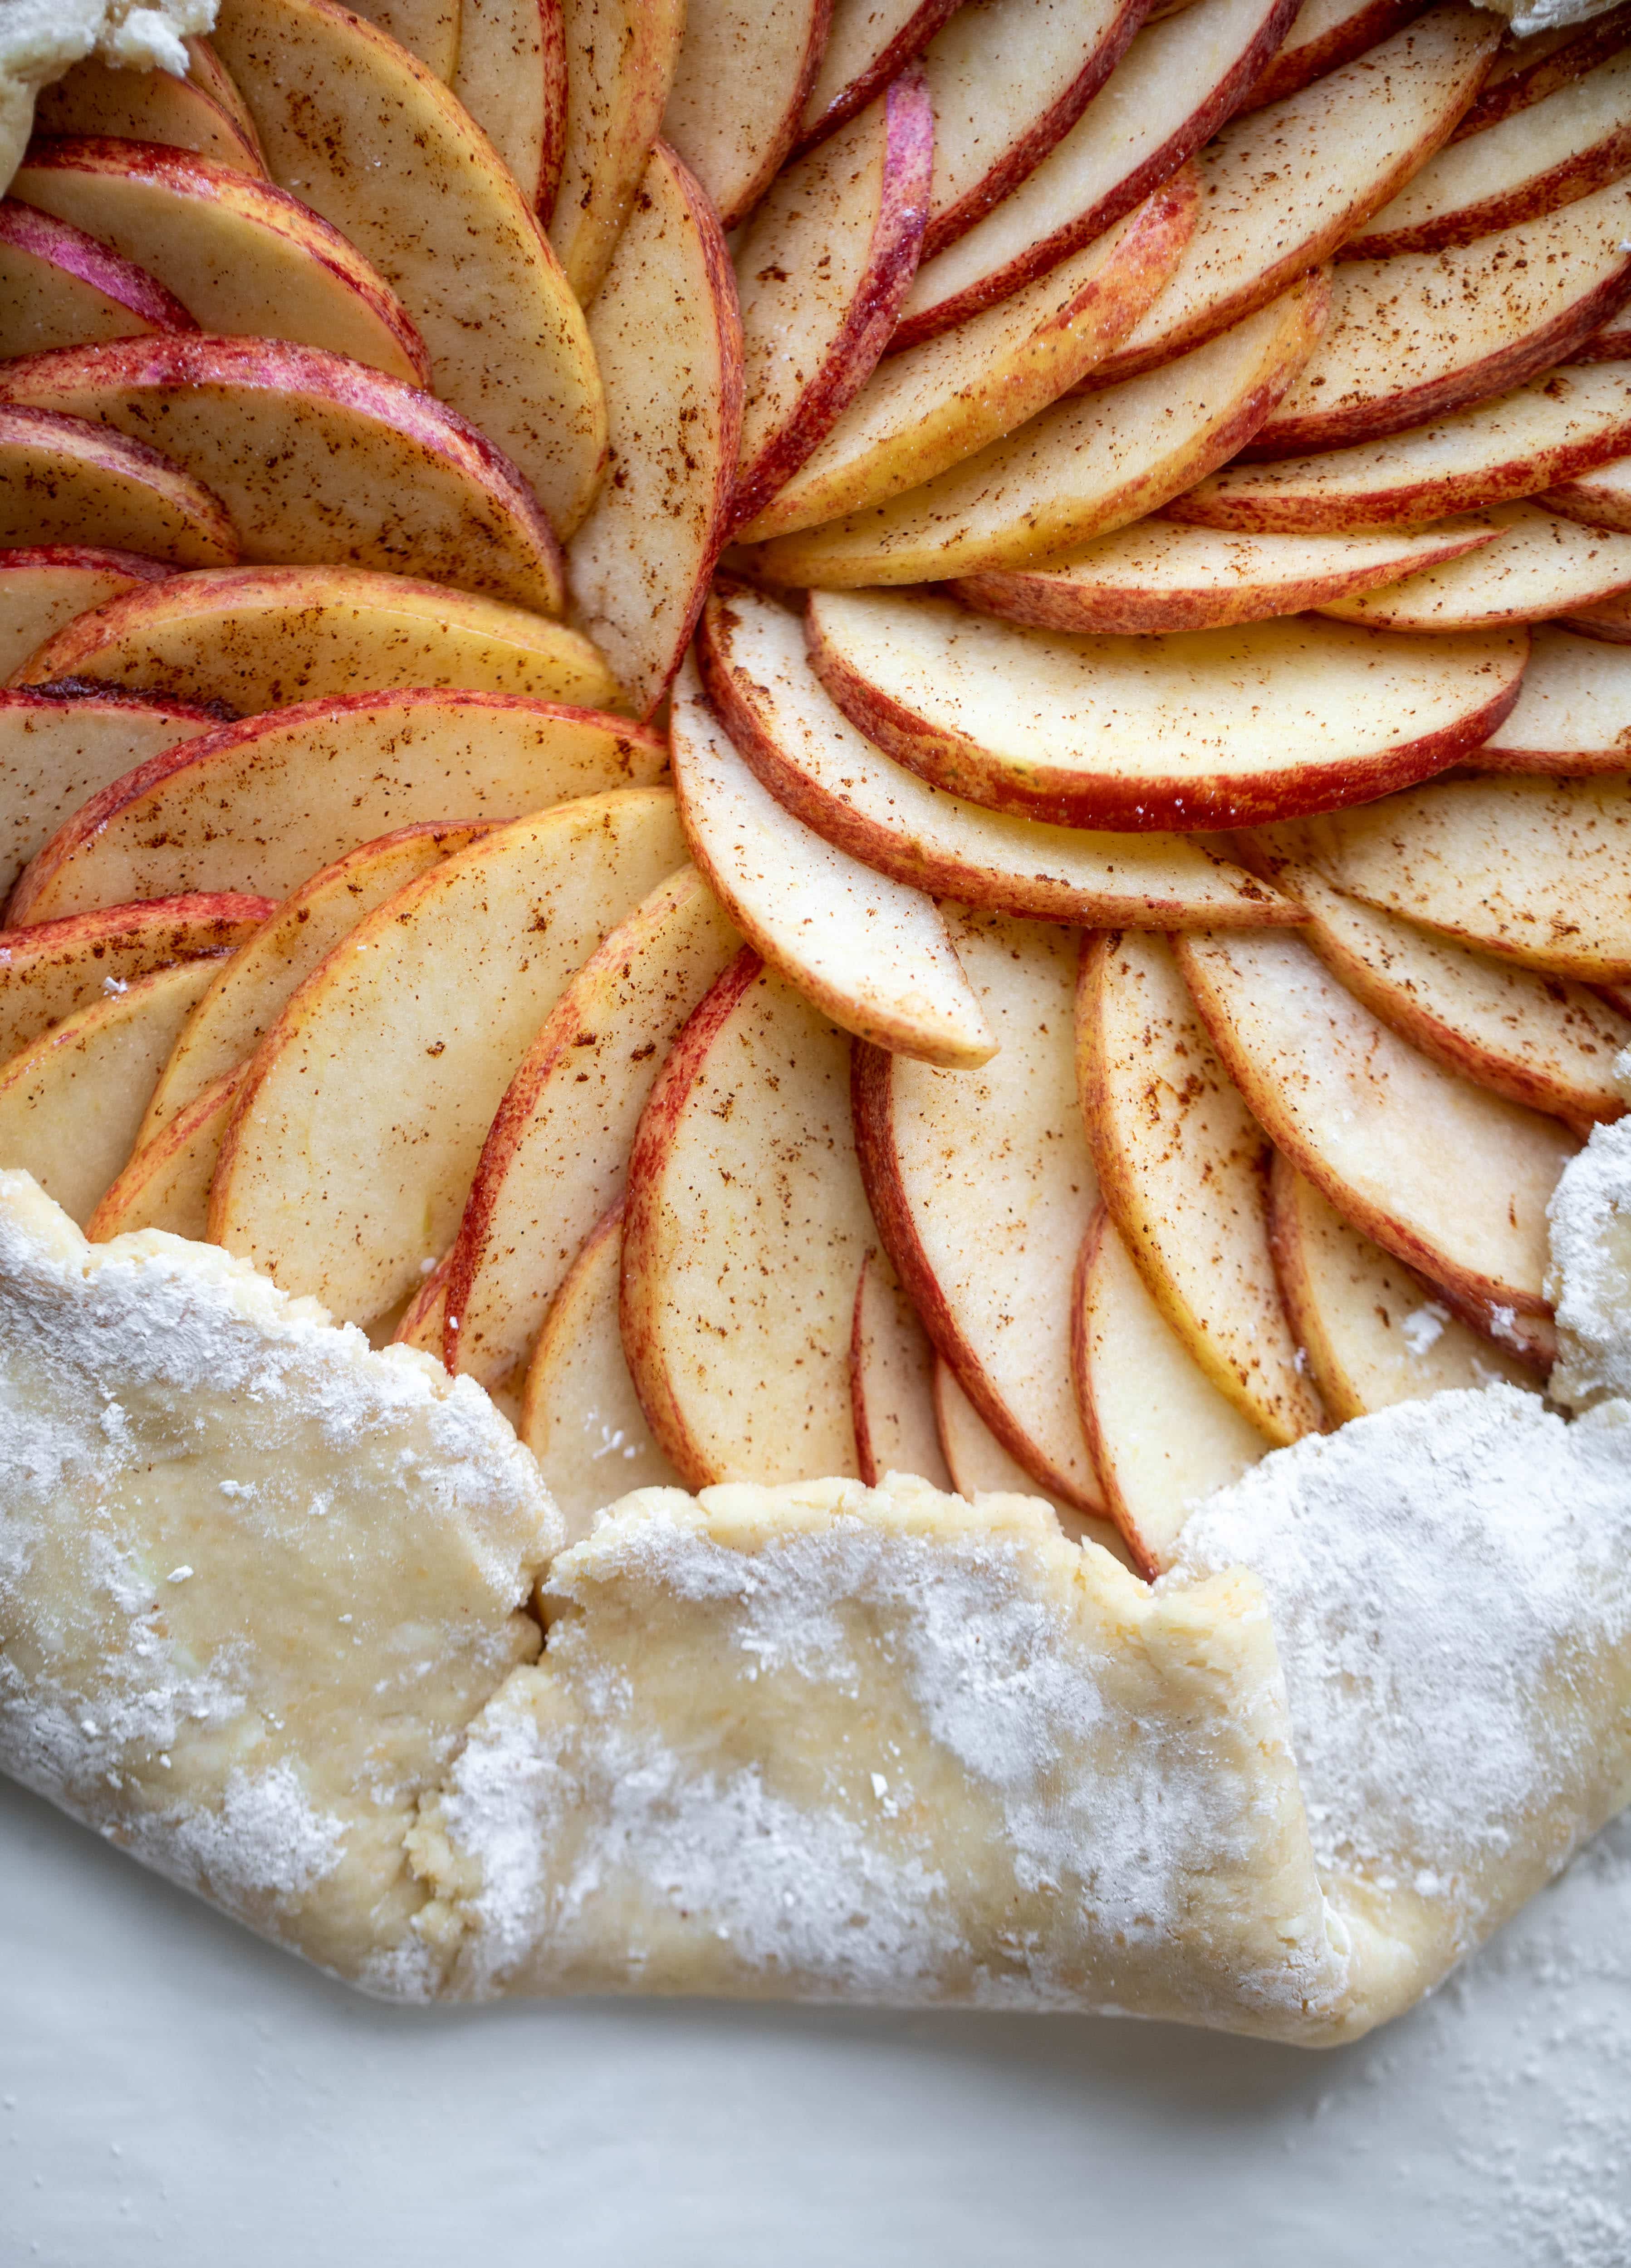 This apple cheddar galette is made with honeycrisp apples, set in a cheddar herb crust and brushed with thyme butter! So delicious and perfect for fall.